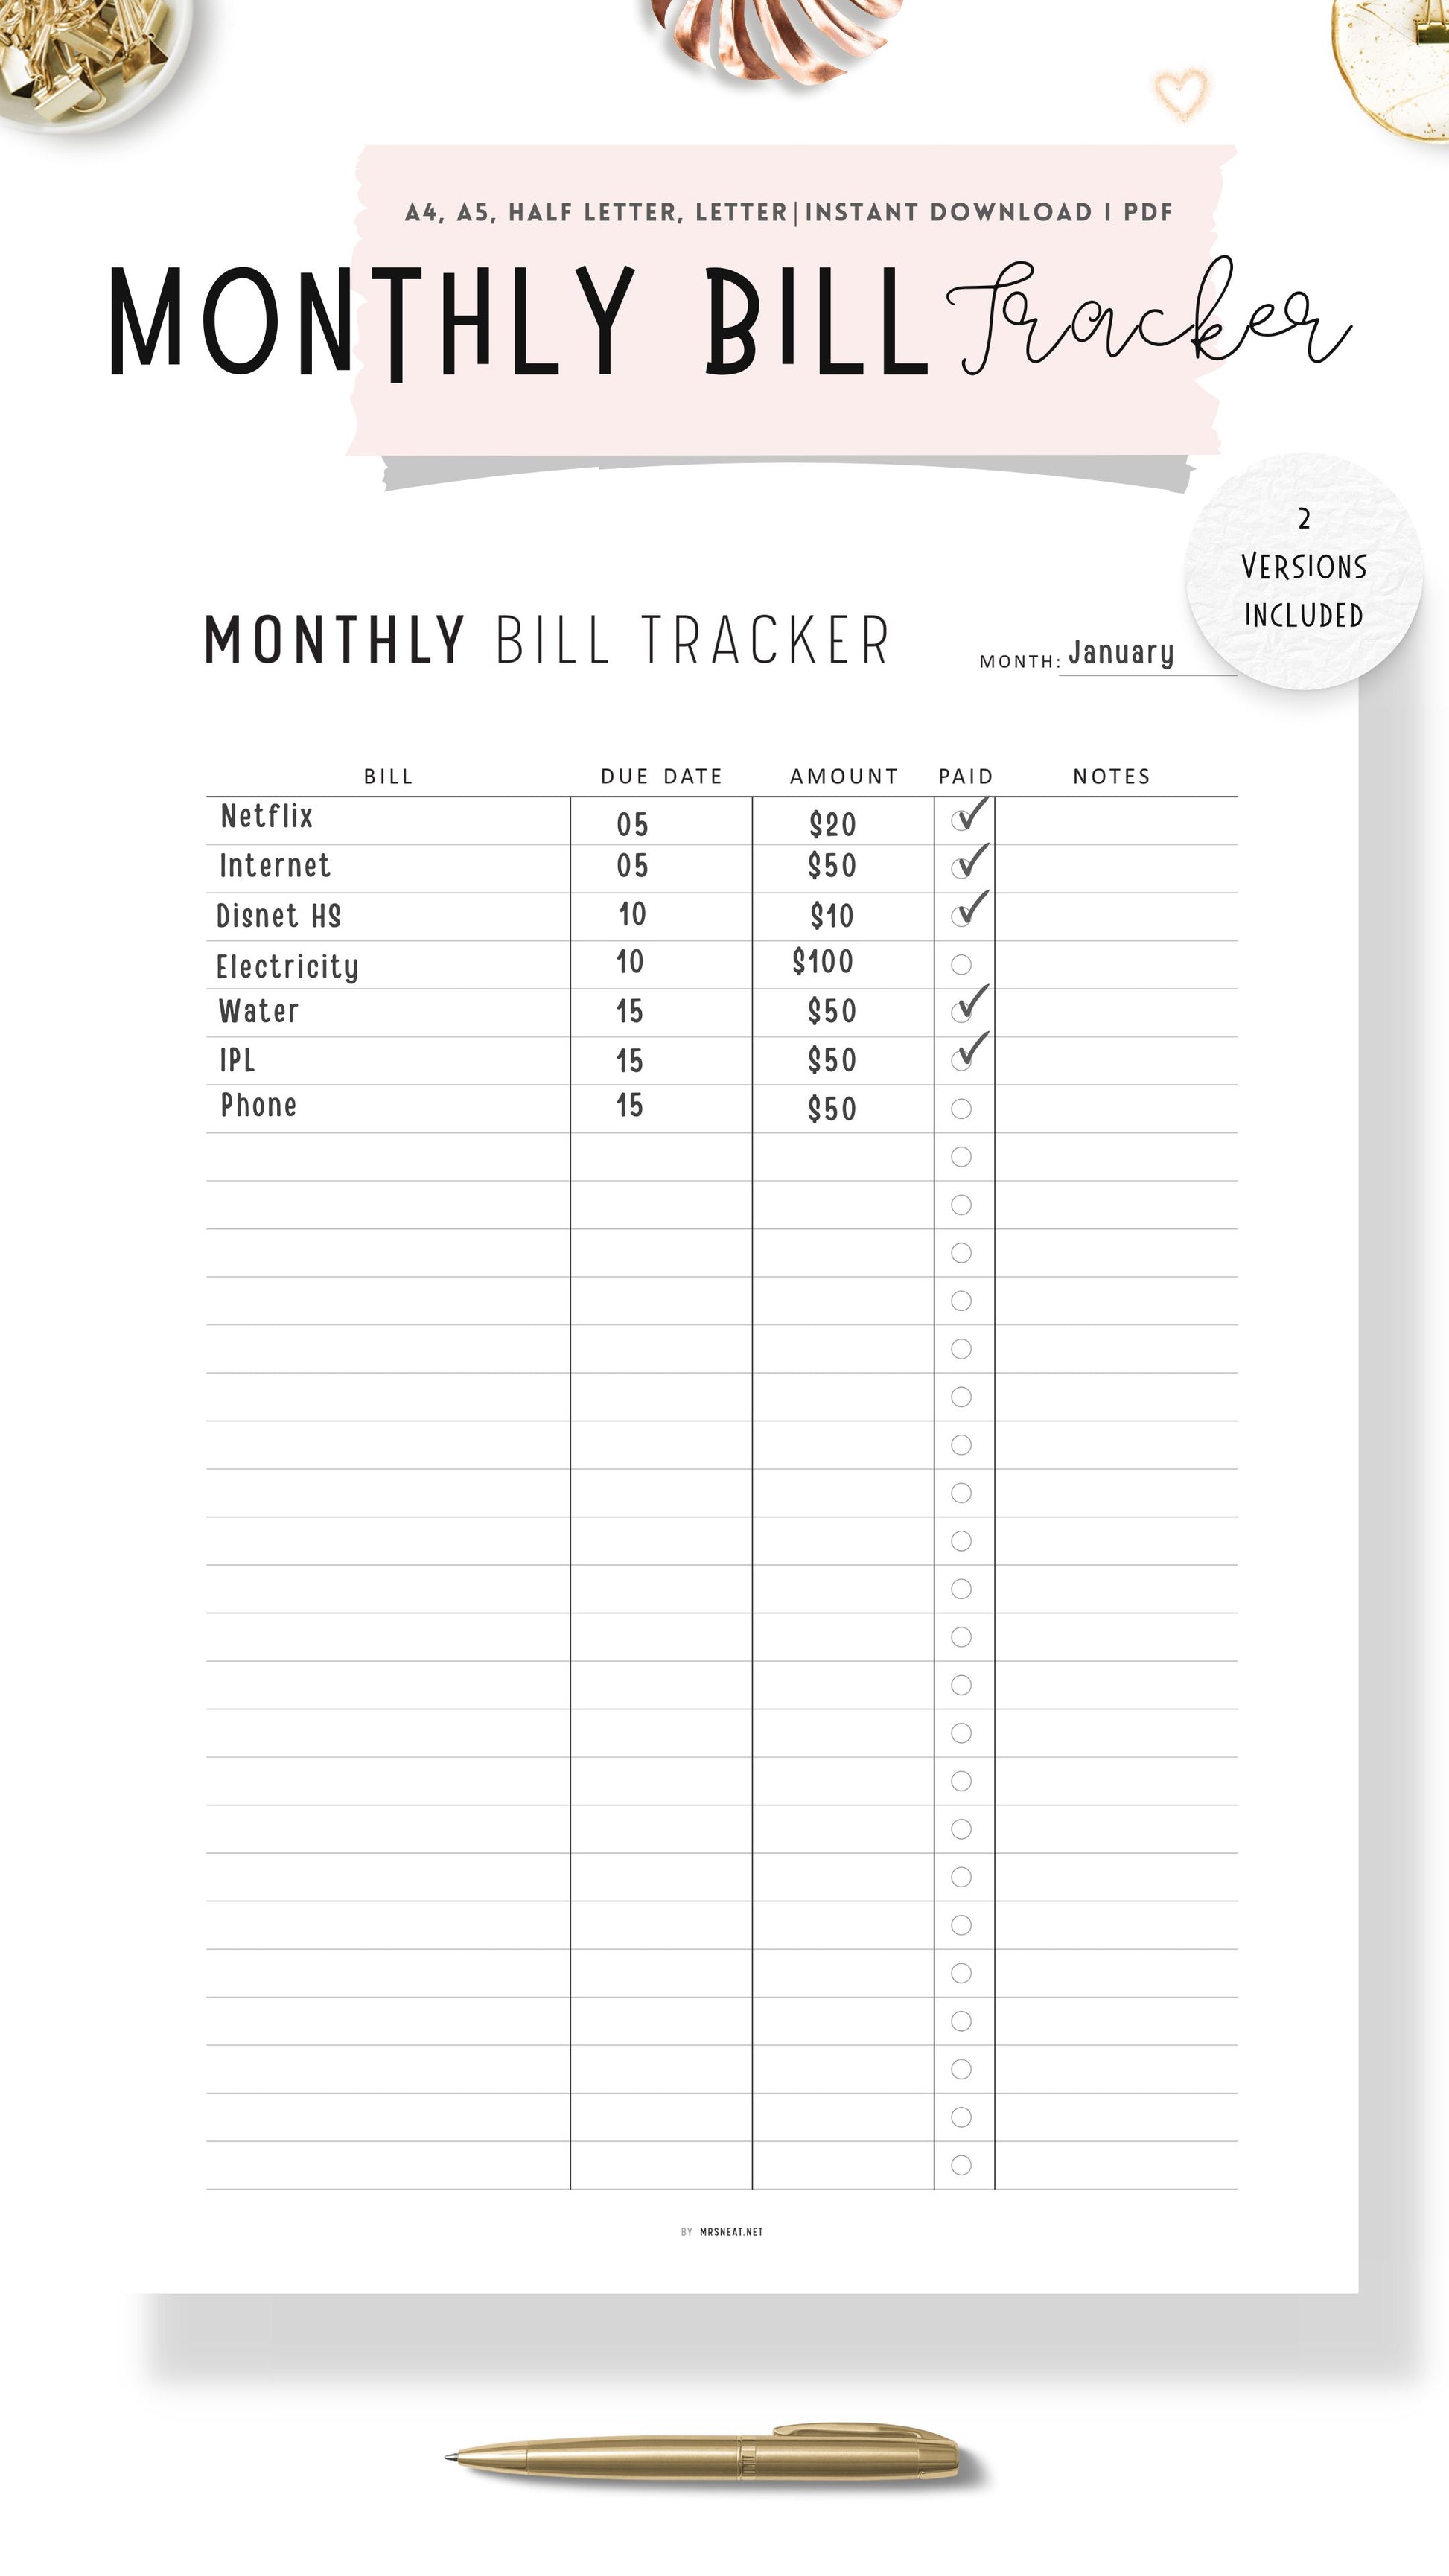 Monthly Bill Payment Tracker Template Printable, Minimalist Version, Colorful Version, A4, A5, Letter, Half Letter, Digital Monthly Budget Planner, Spending Tracker Template